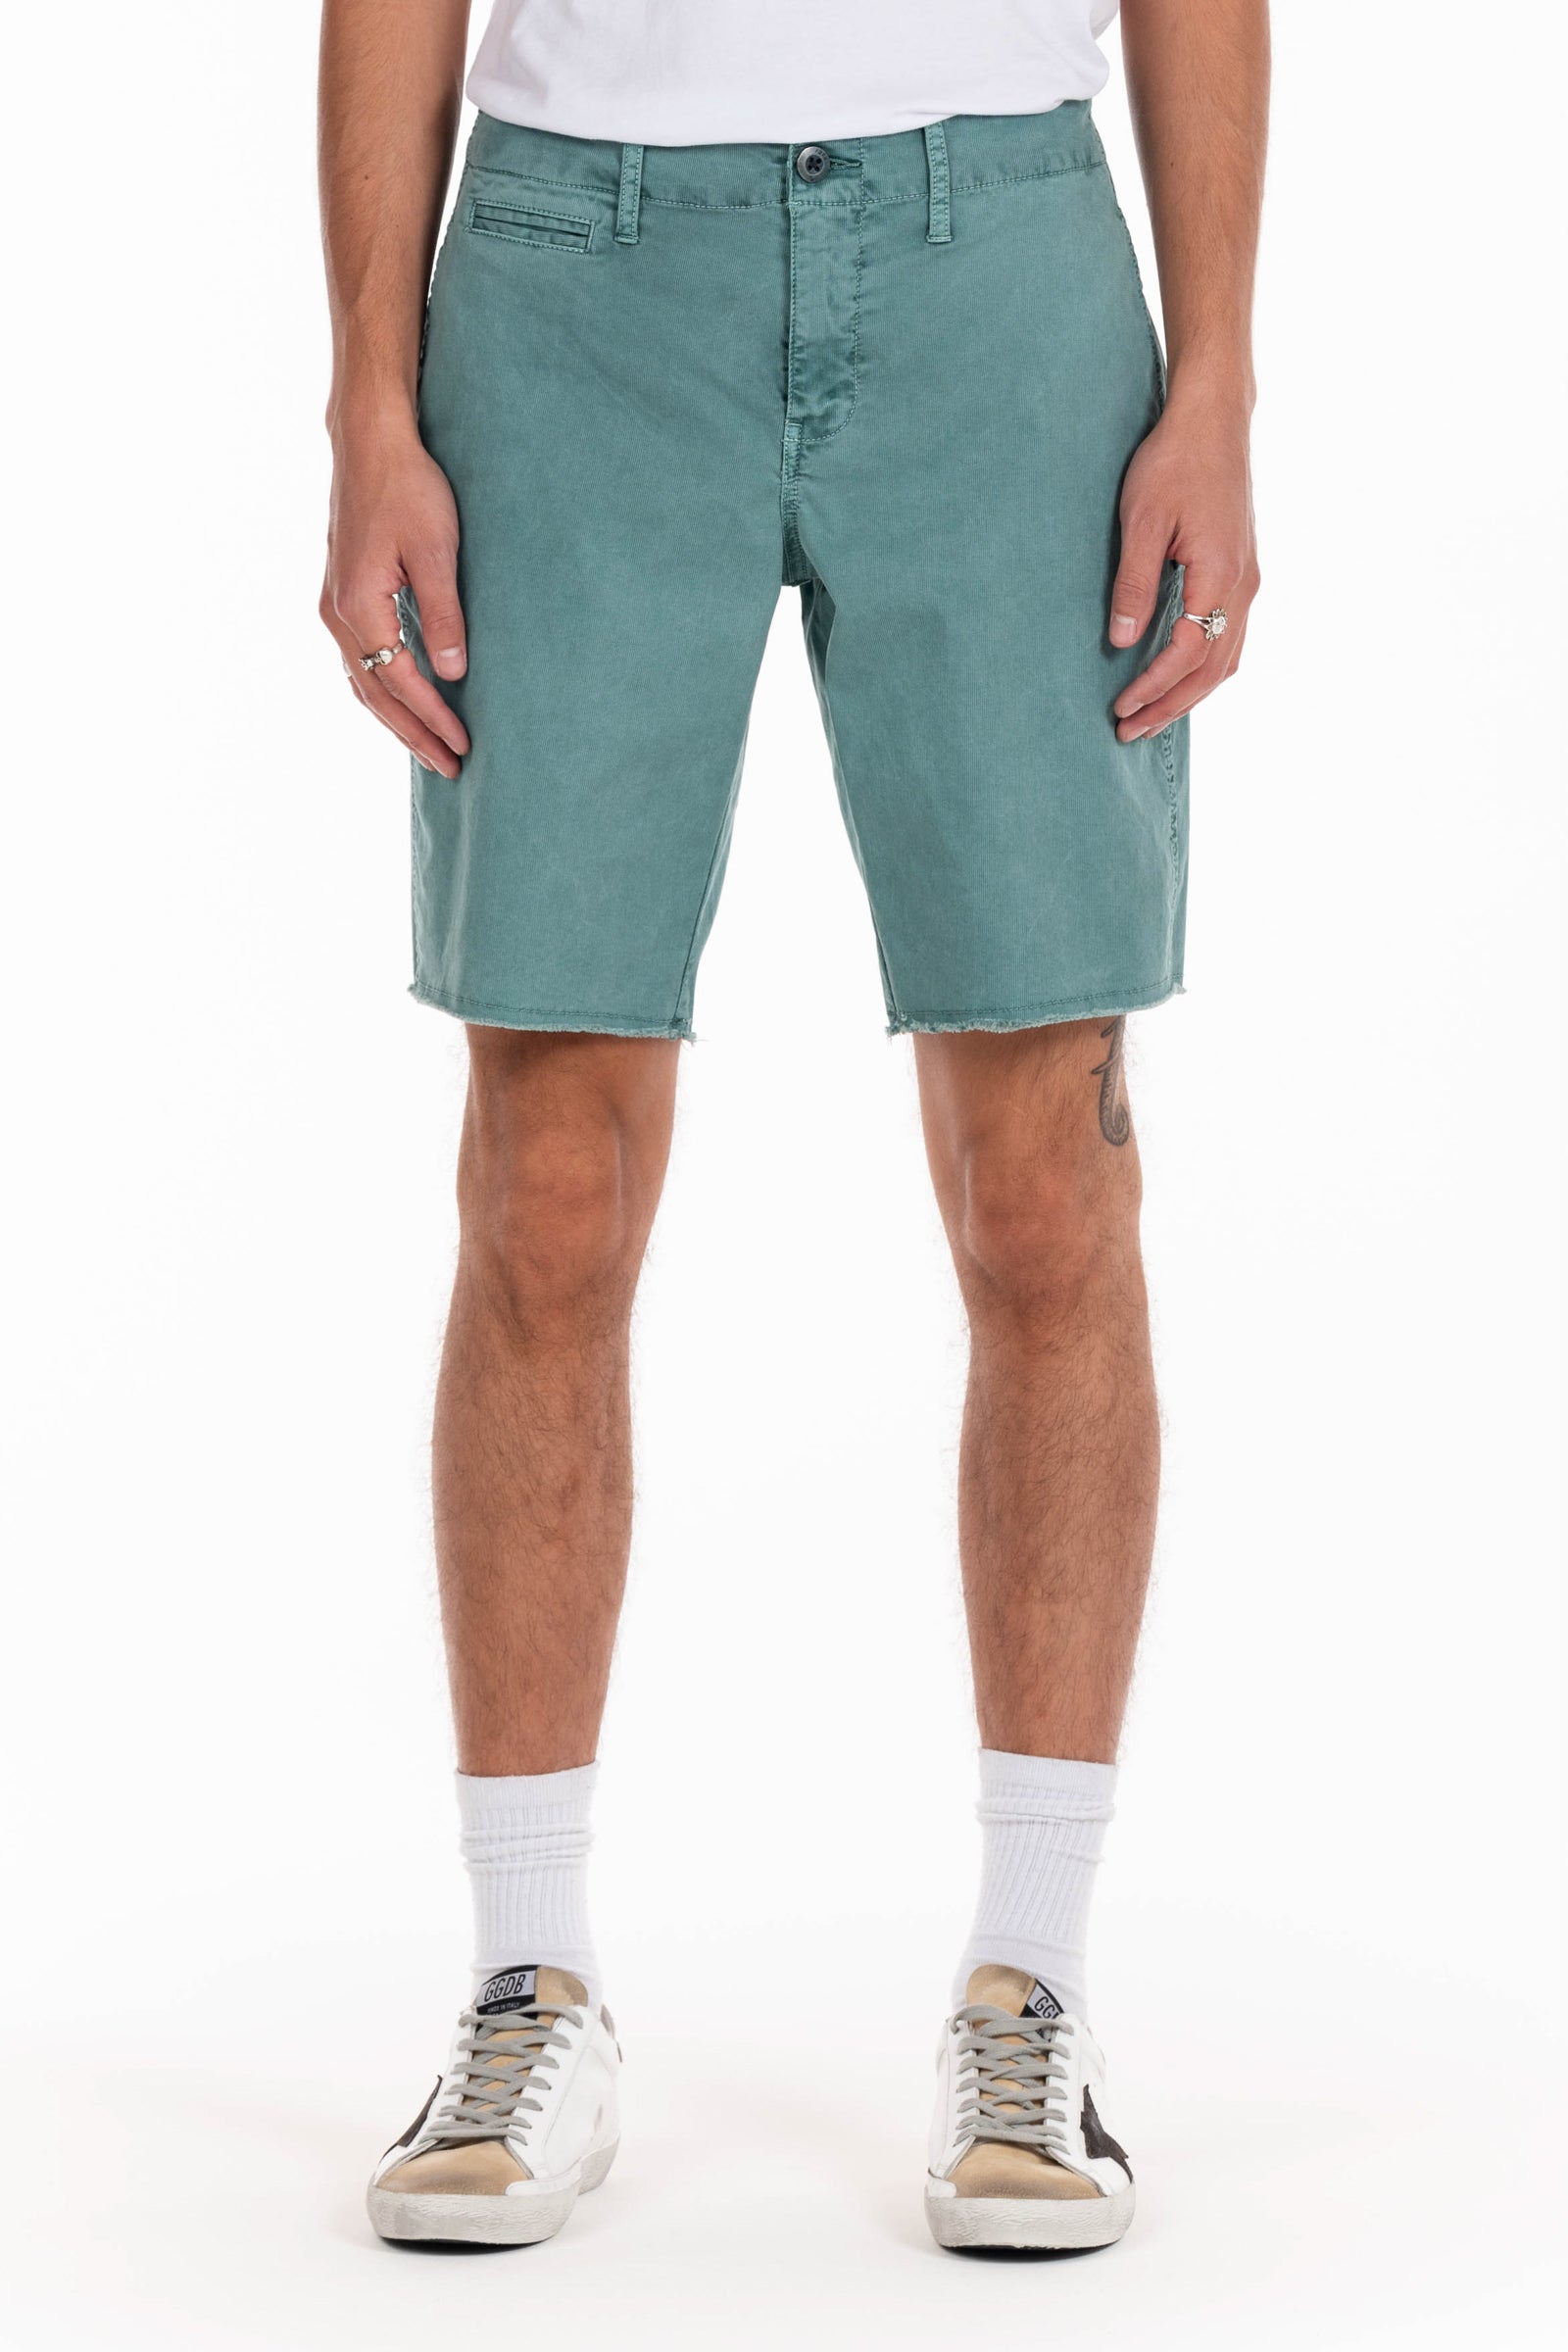 Original Paperbacks Rockland Chino Short in Breakwater on Model Cropped Front View